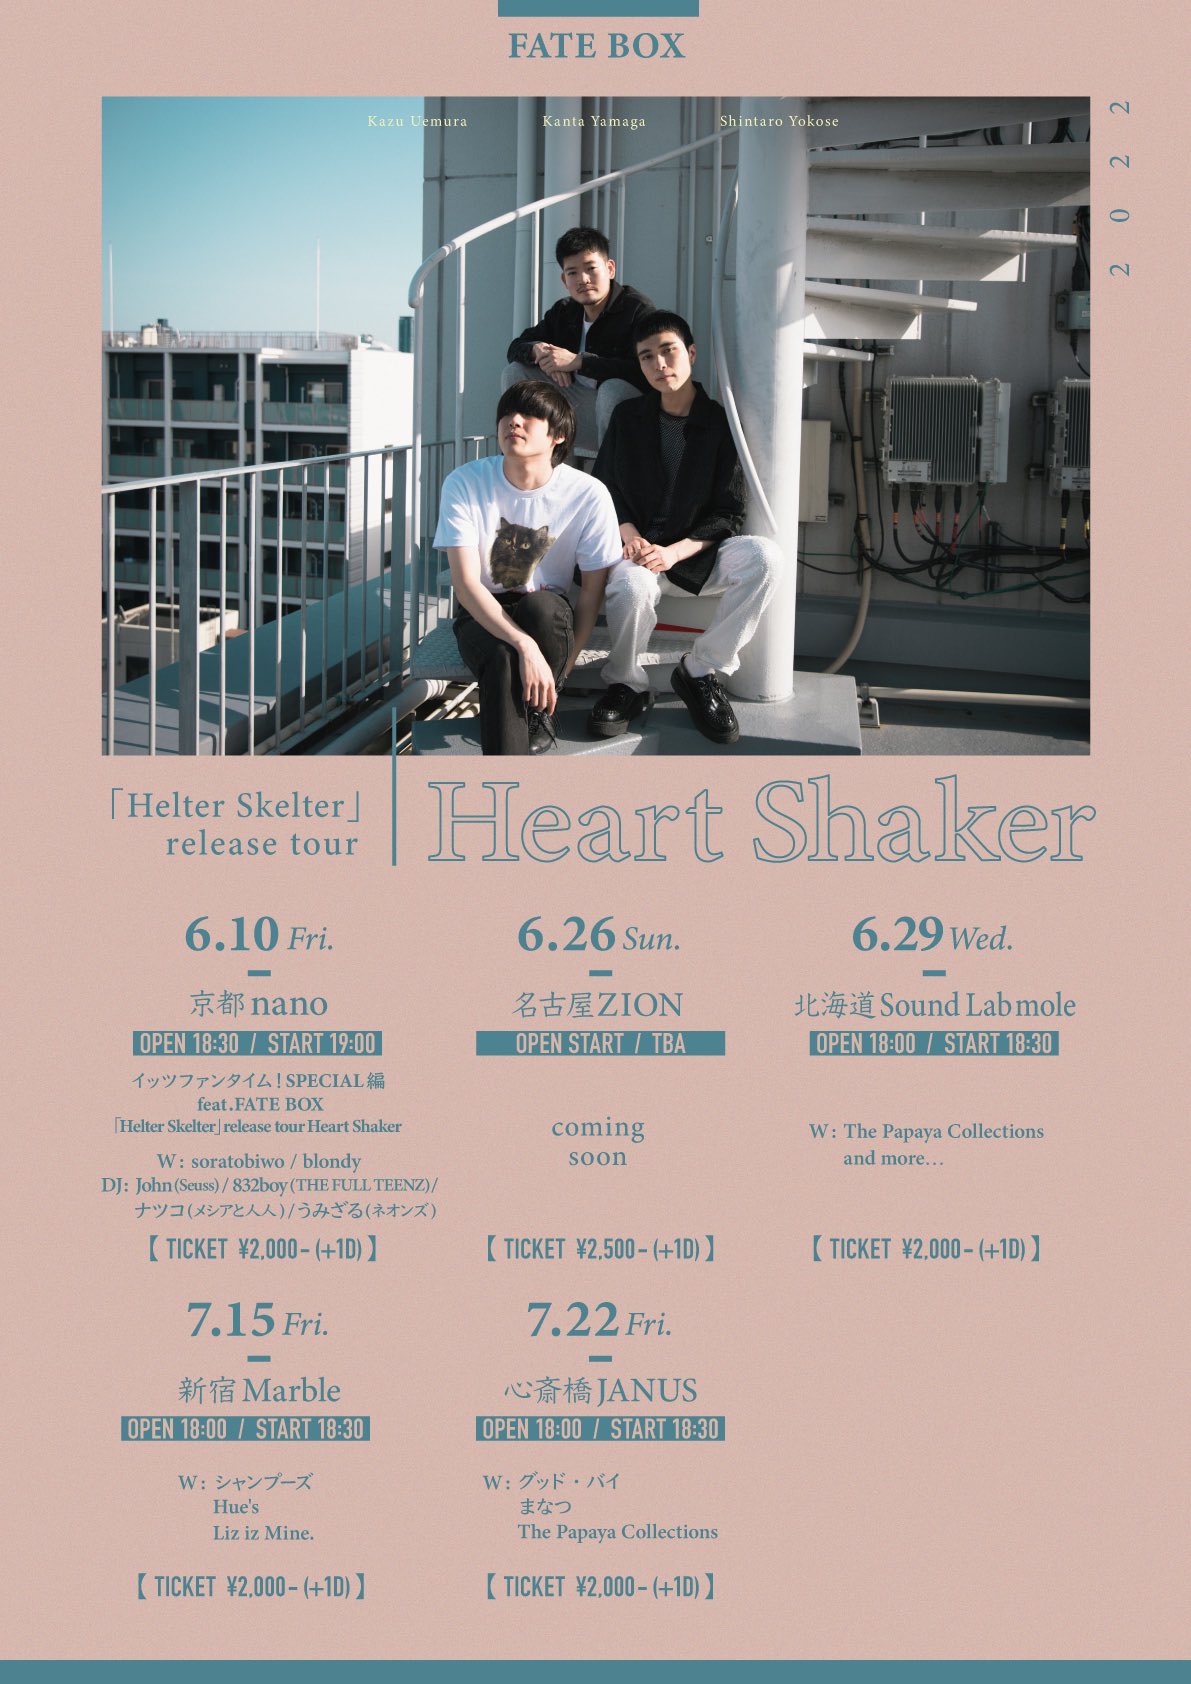 FATE BOX 「Helter Skelter」release tour 『Heart Shaker』